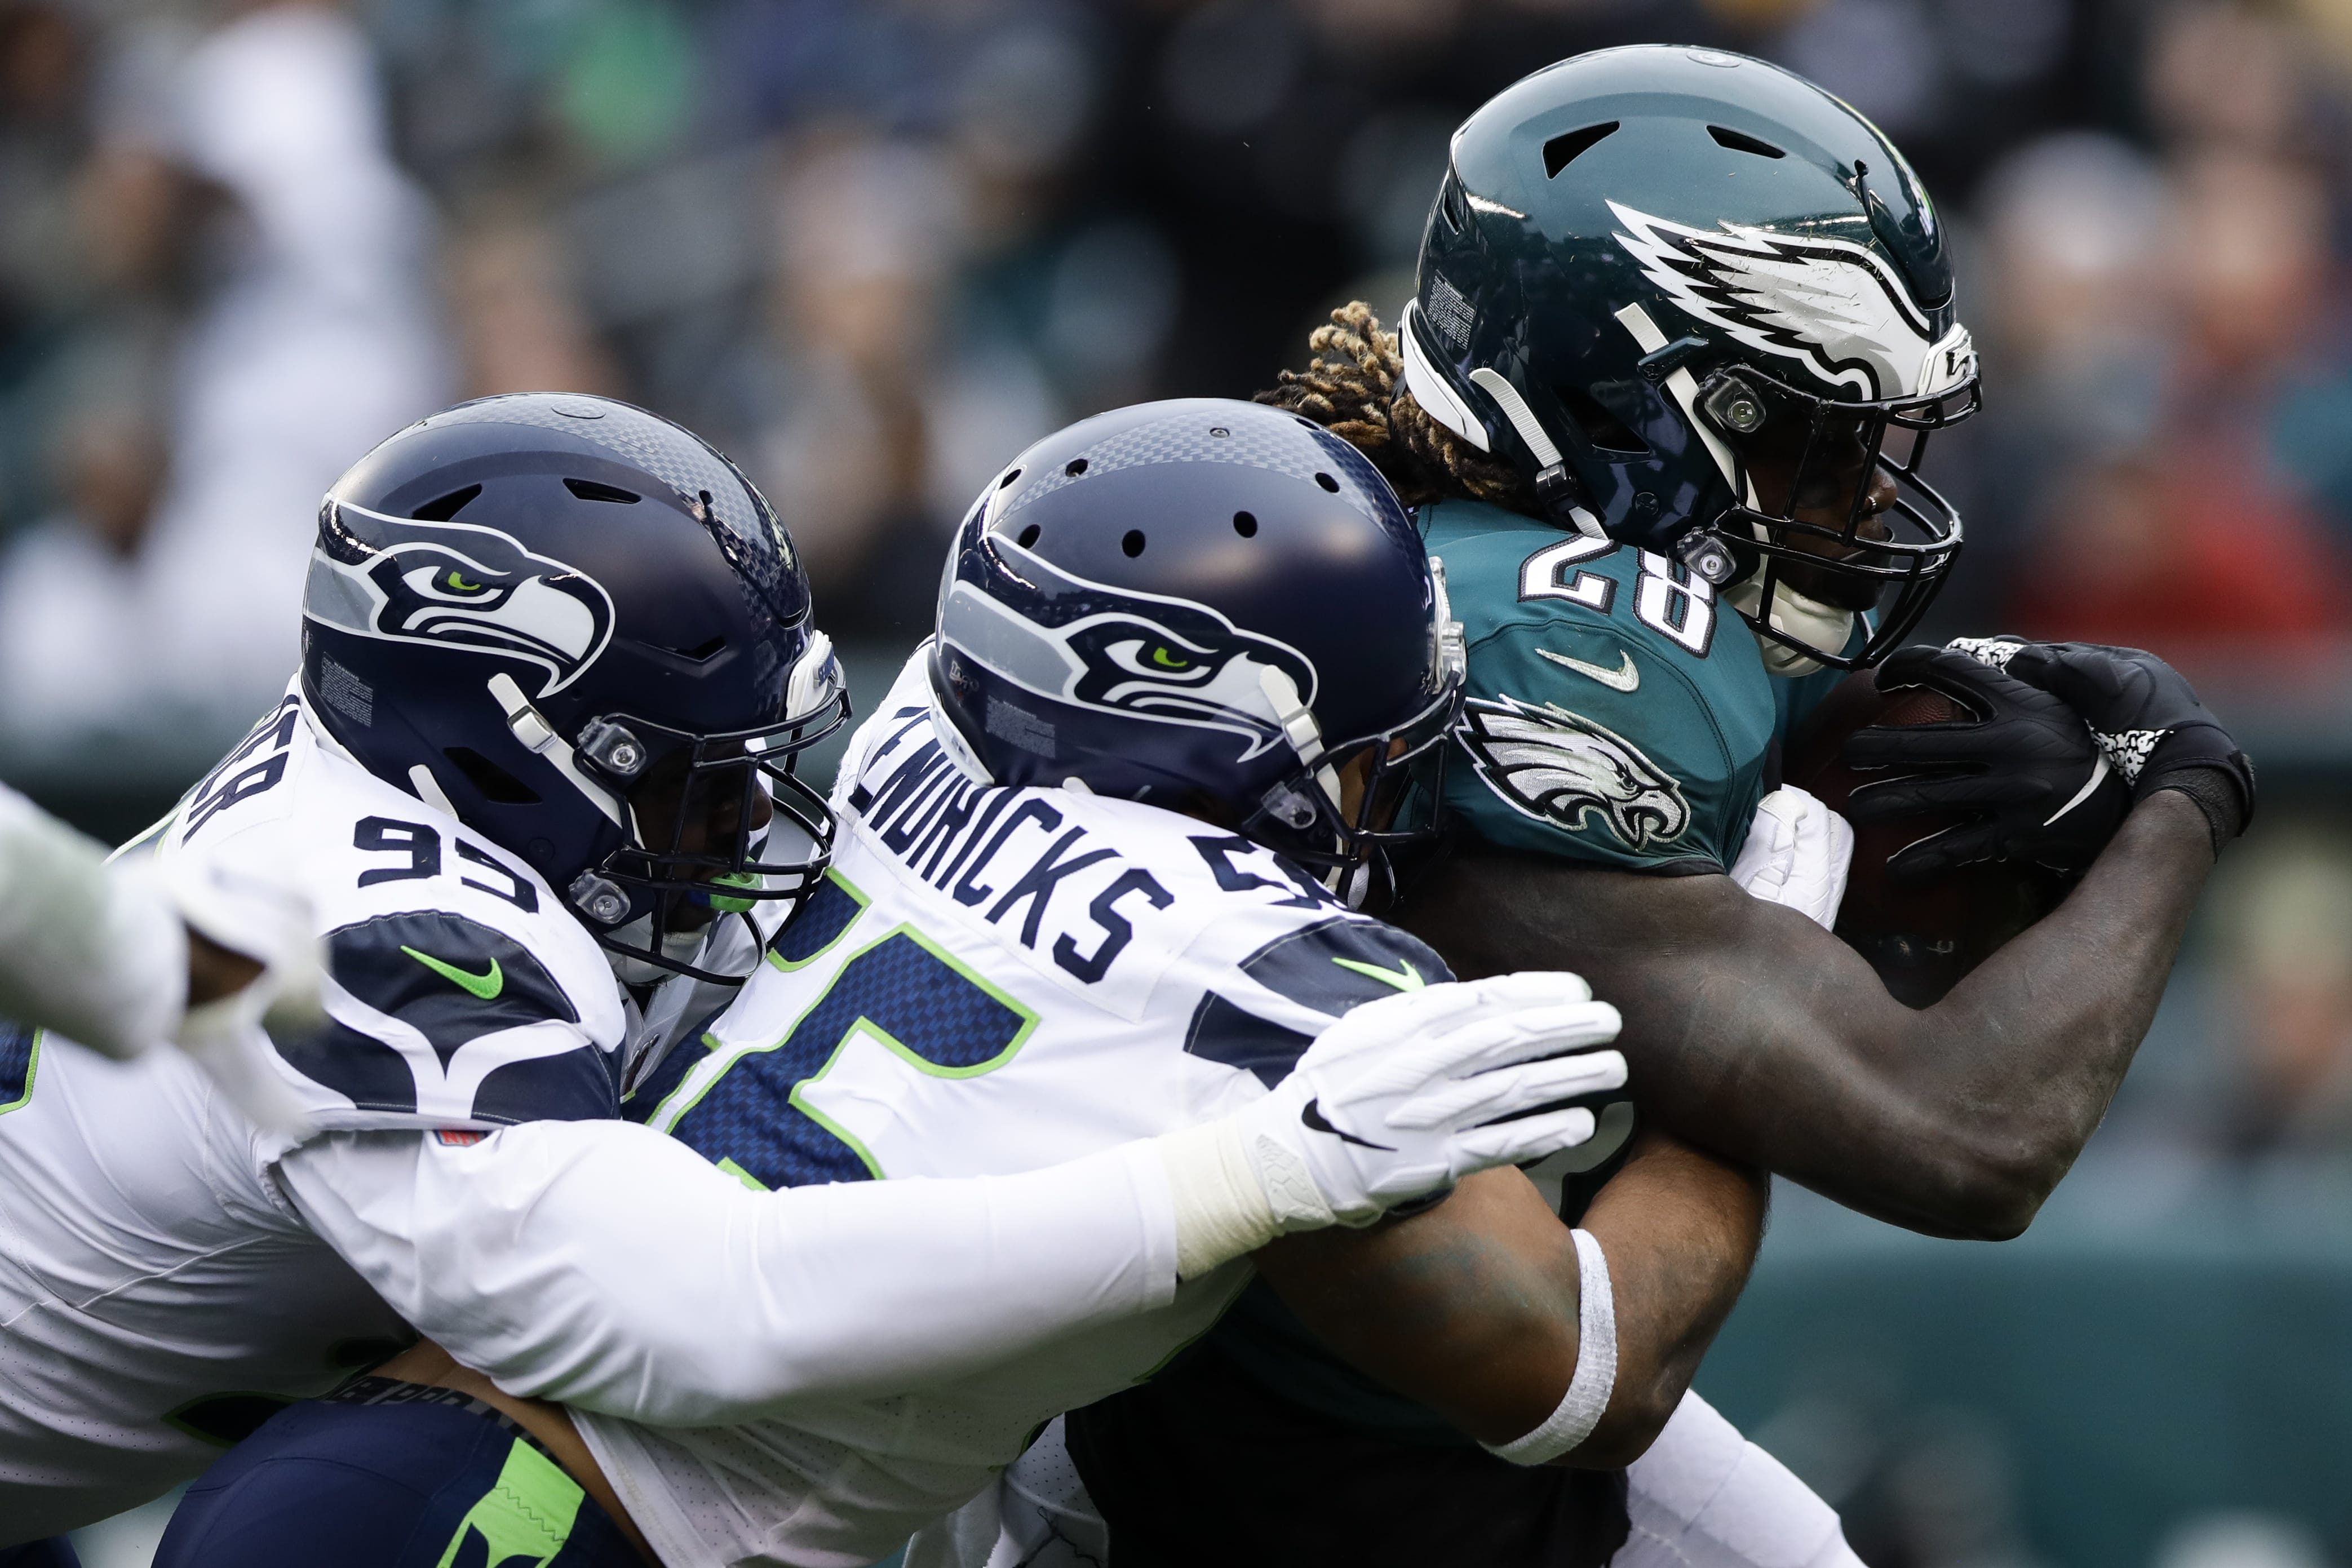 Philadelphia Eagles' Jay Ajayi (28) is tackled by Seattle Seahawks' Mychal Kendricks (56) and L.J. Collier (95) during the first half of an NFL football game, Sunday, Nov. 24, 2019, in Philadelphia.